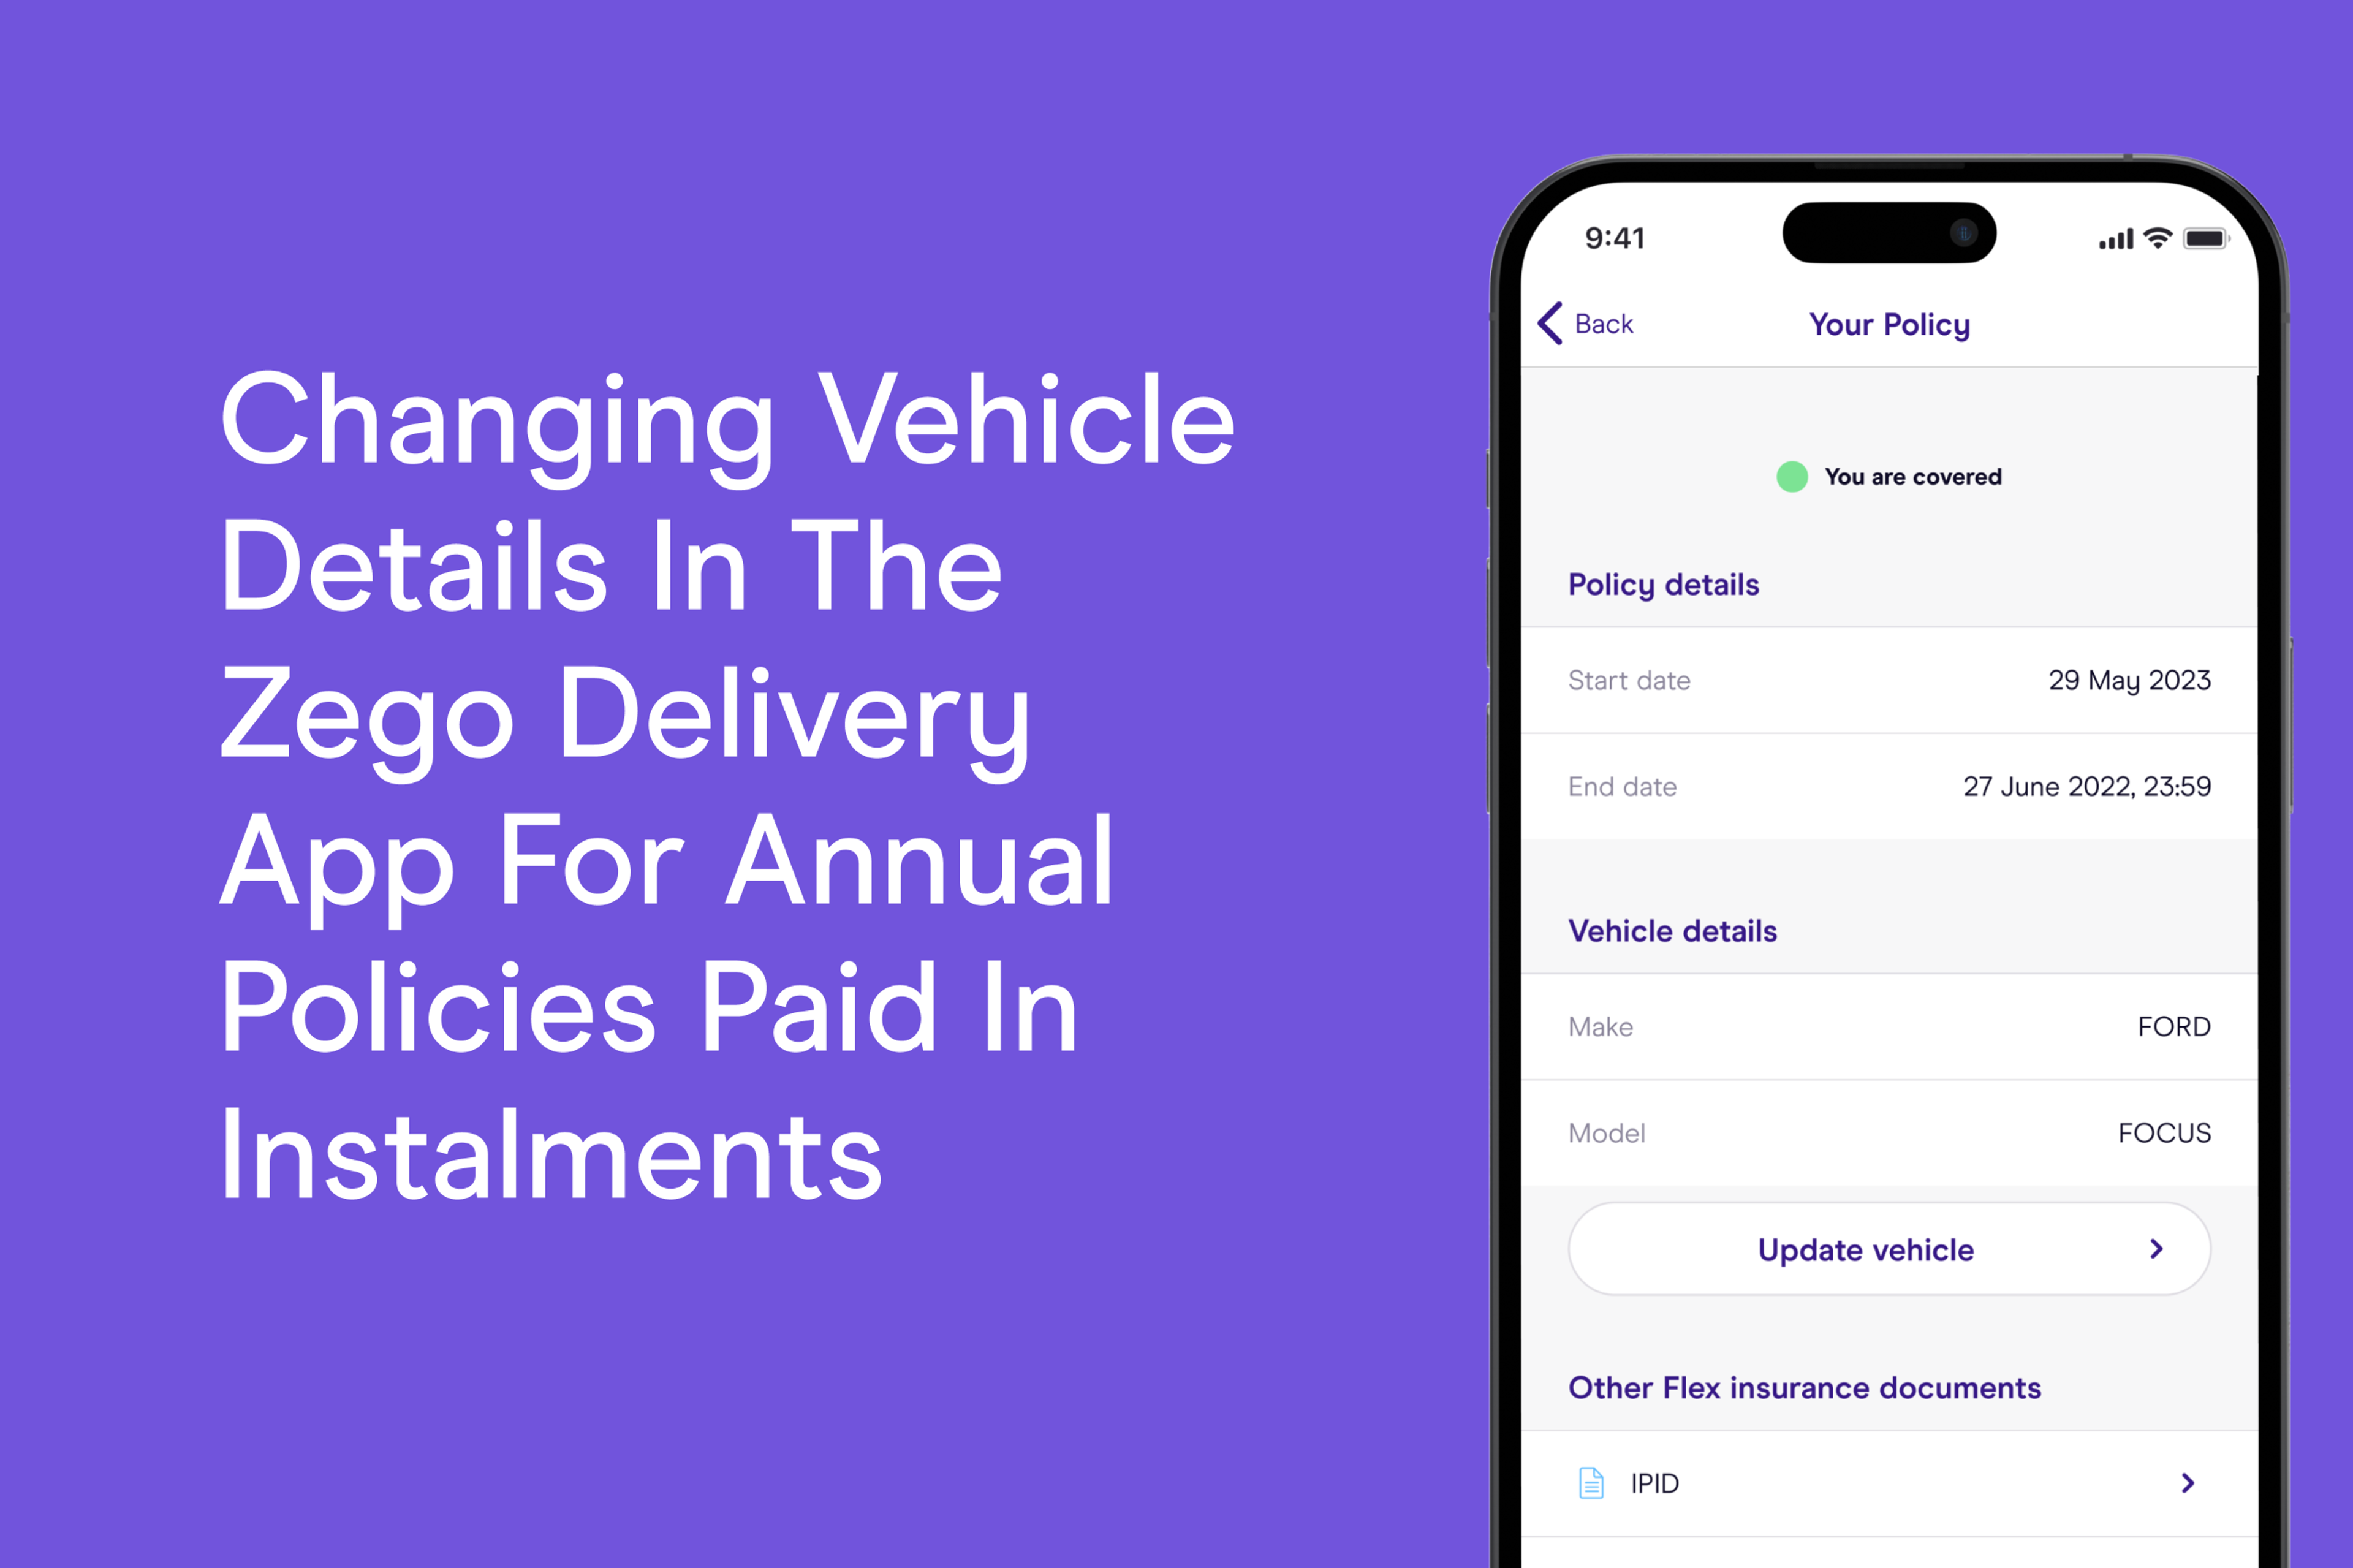 Changing vehicle details in the Zego Delivery app for annual policies paid in instalments